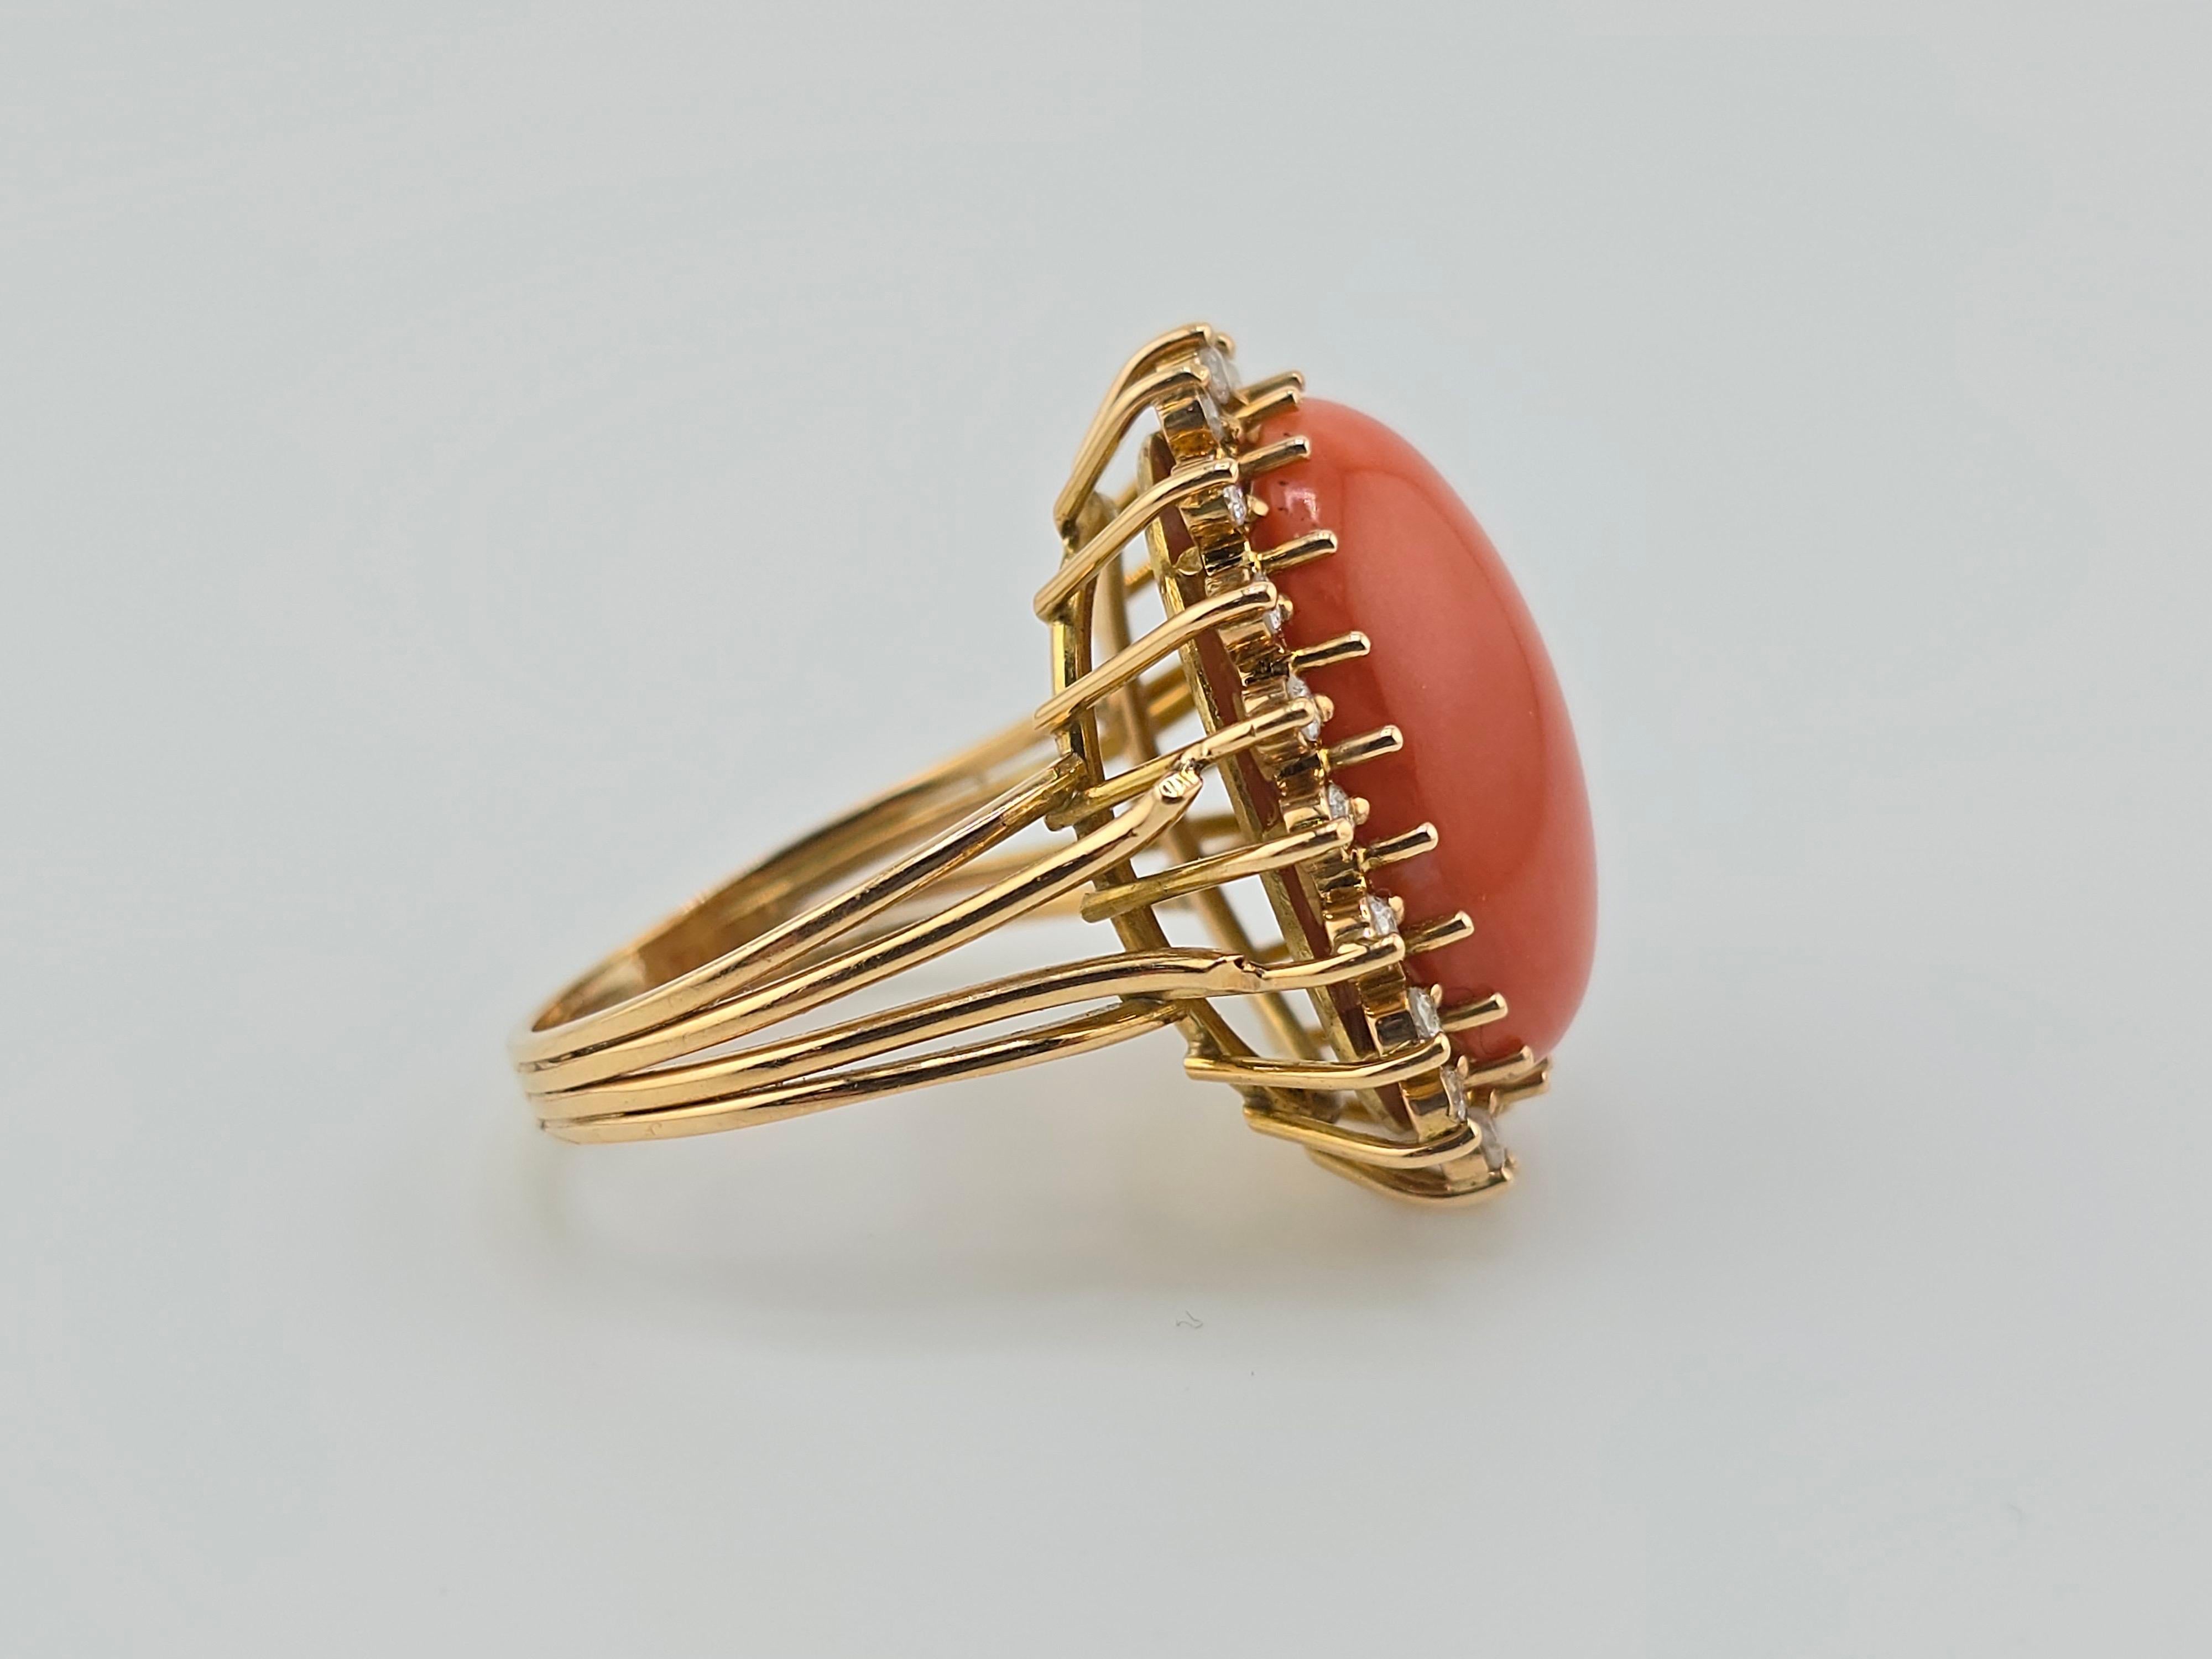 Marvelous Italian Momo Coral 14K Yellow Gold Ring Surrounded With Diamonds  For Sale 1